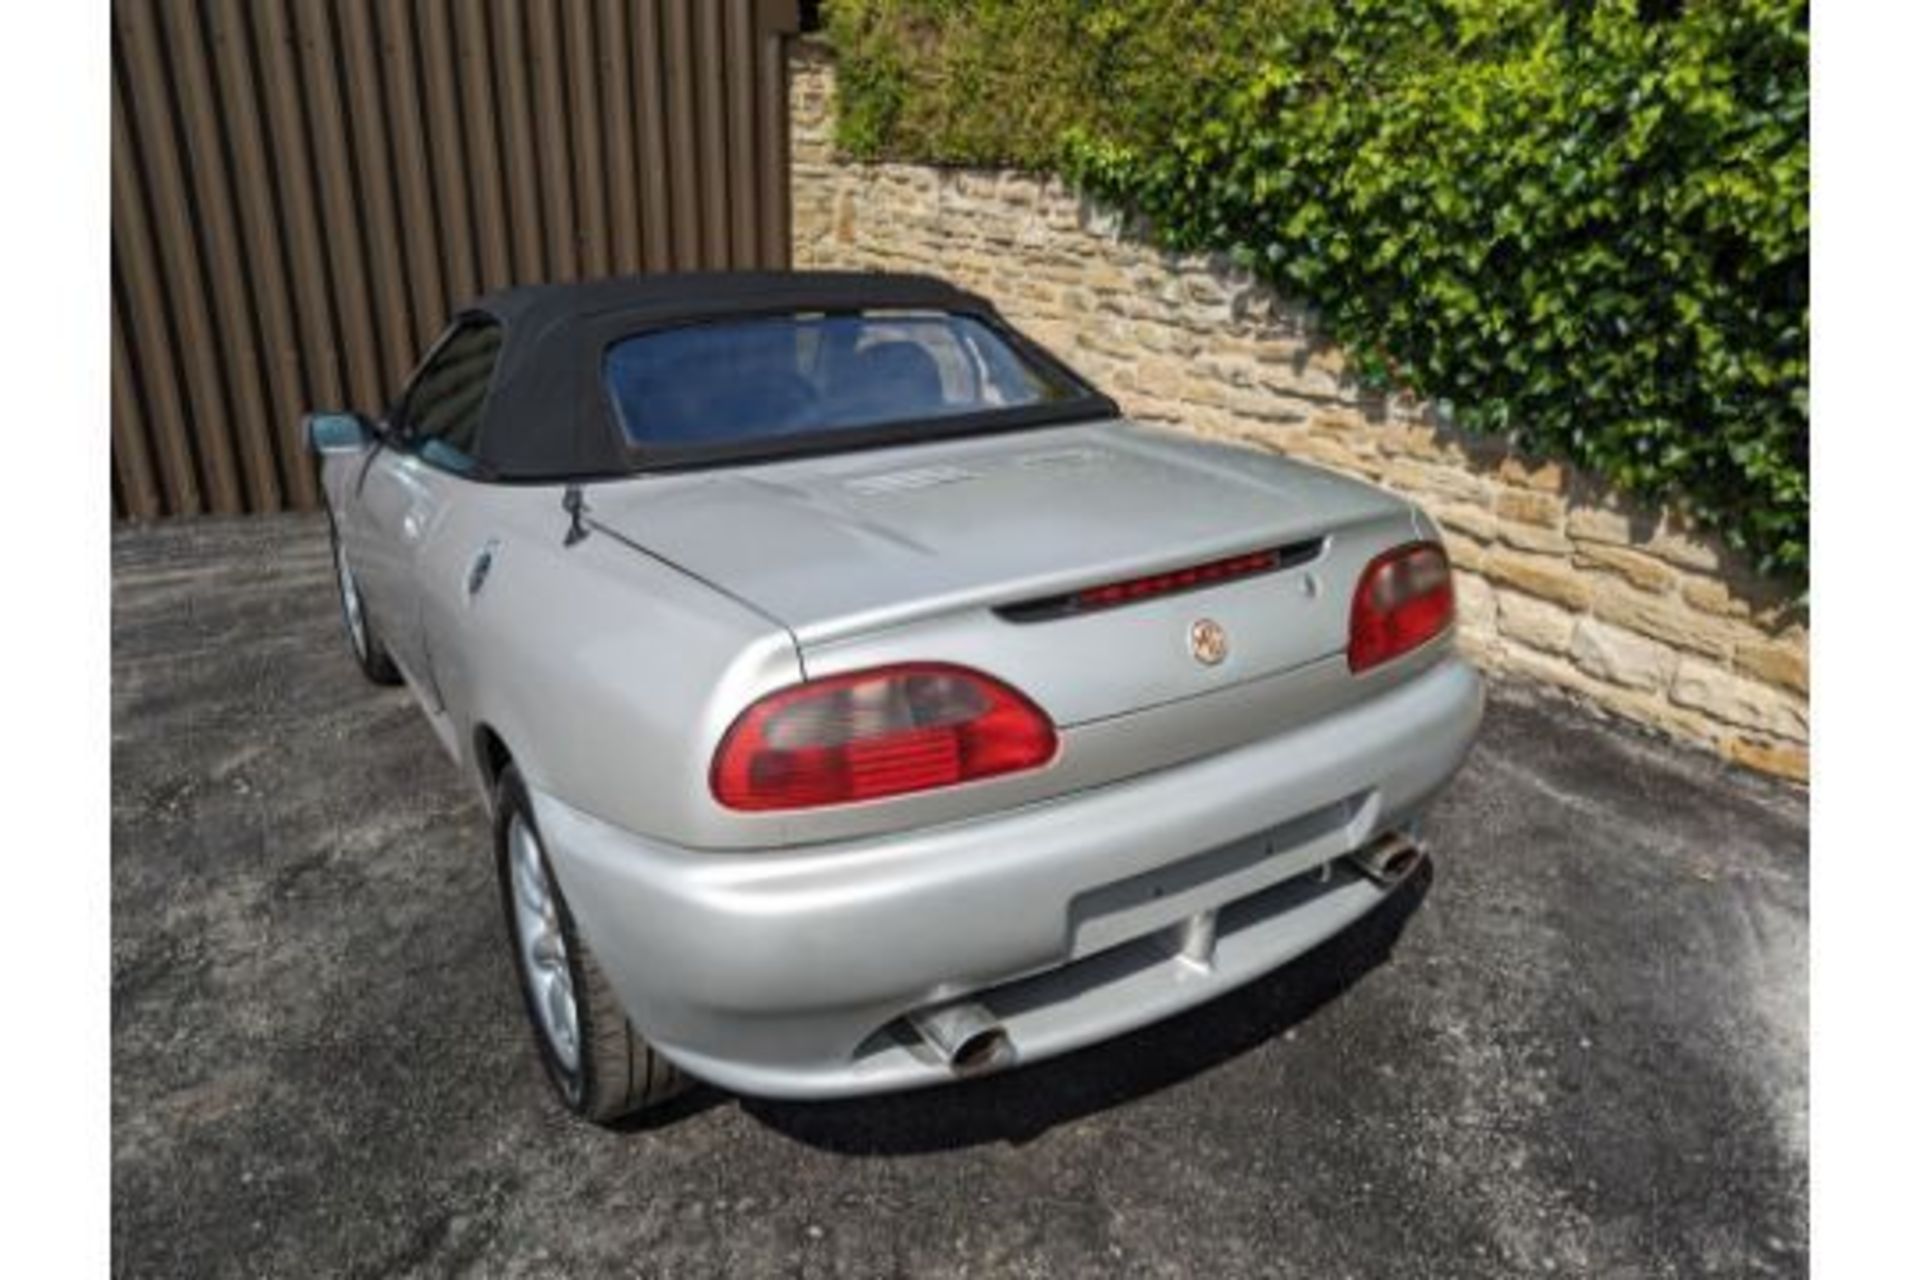 MG MGF Convertible Silver Registered Year 2000 (W Reg) 97545 Miles 1.8L, - Image 5 of 11